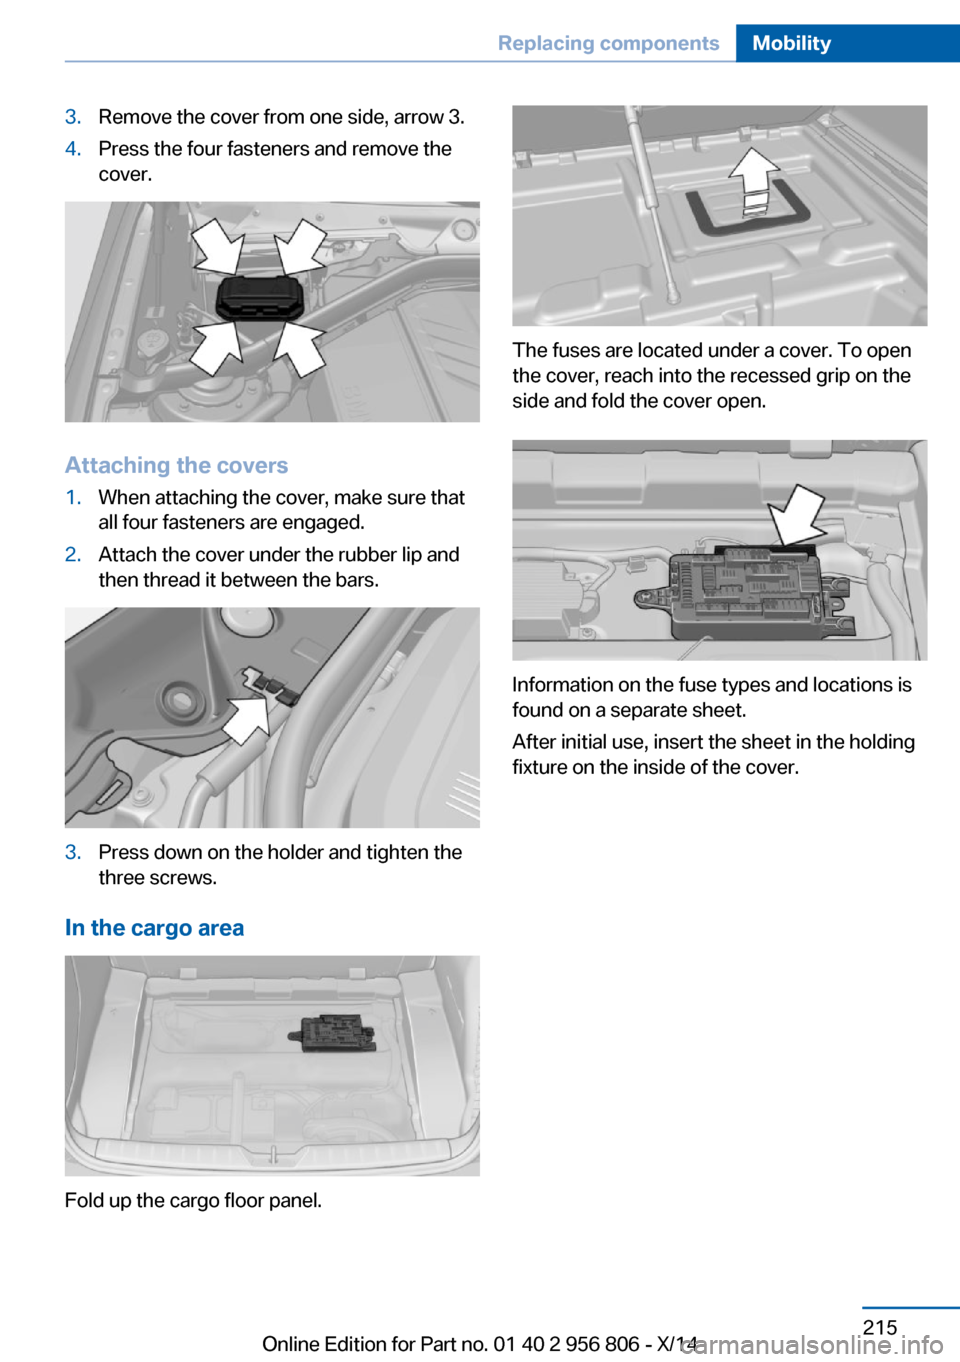 BMW 3 SERIES GRAN COUPE 2014 F34 Owners Manual 3.Remove the cover from one side, arrow 3.4.Press the four fasteners and remove the
cover.
Attaching the covers
1.When attaching the cover, make sure that
all four fasteners are engaged.2.Attach the c